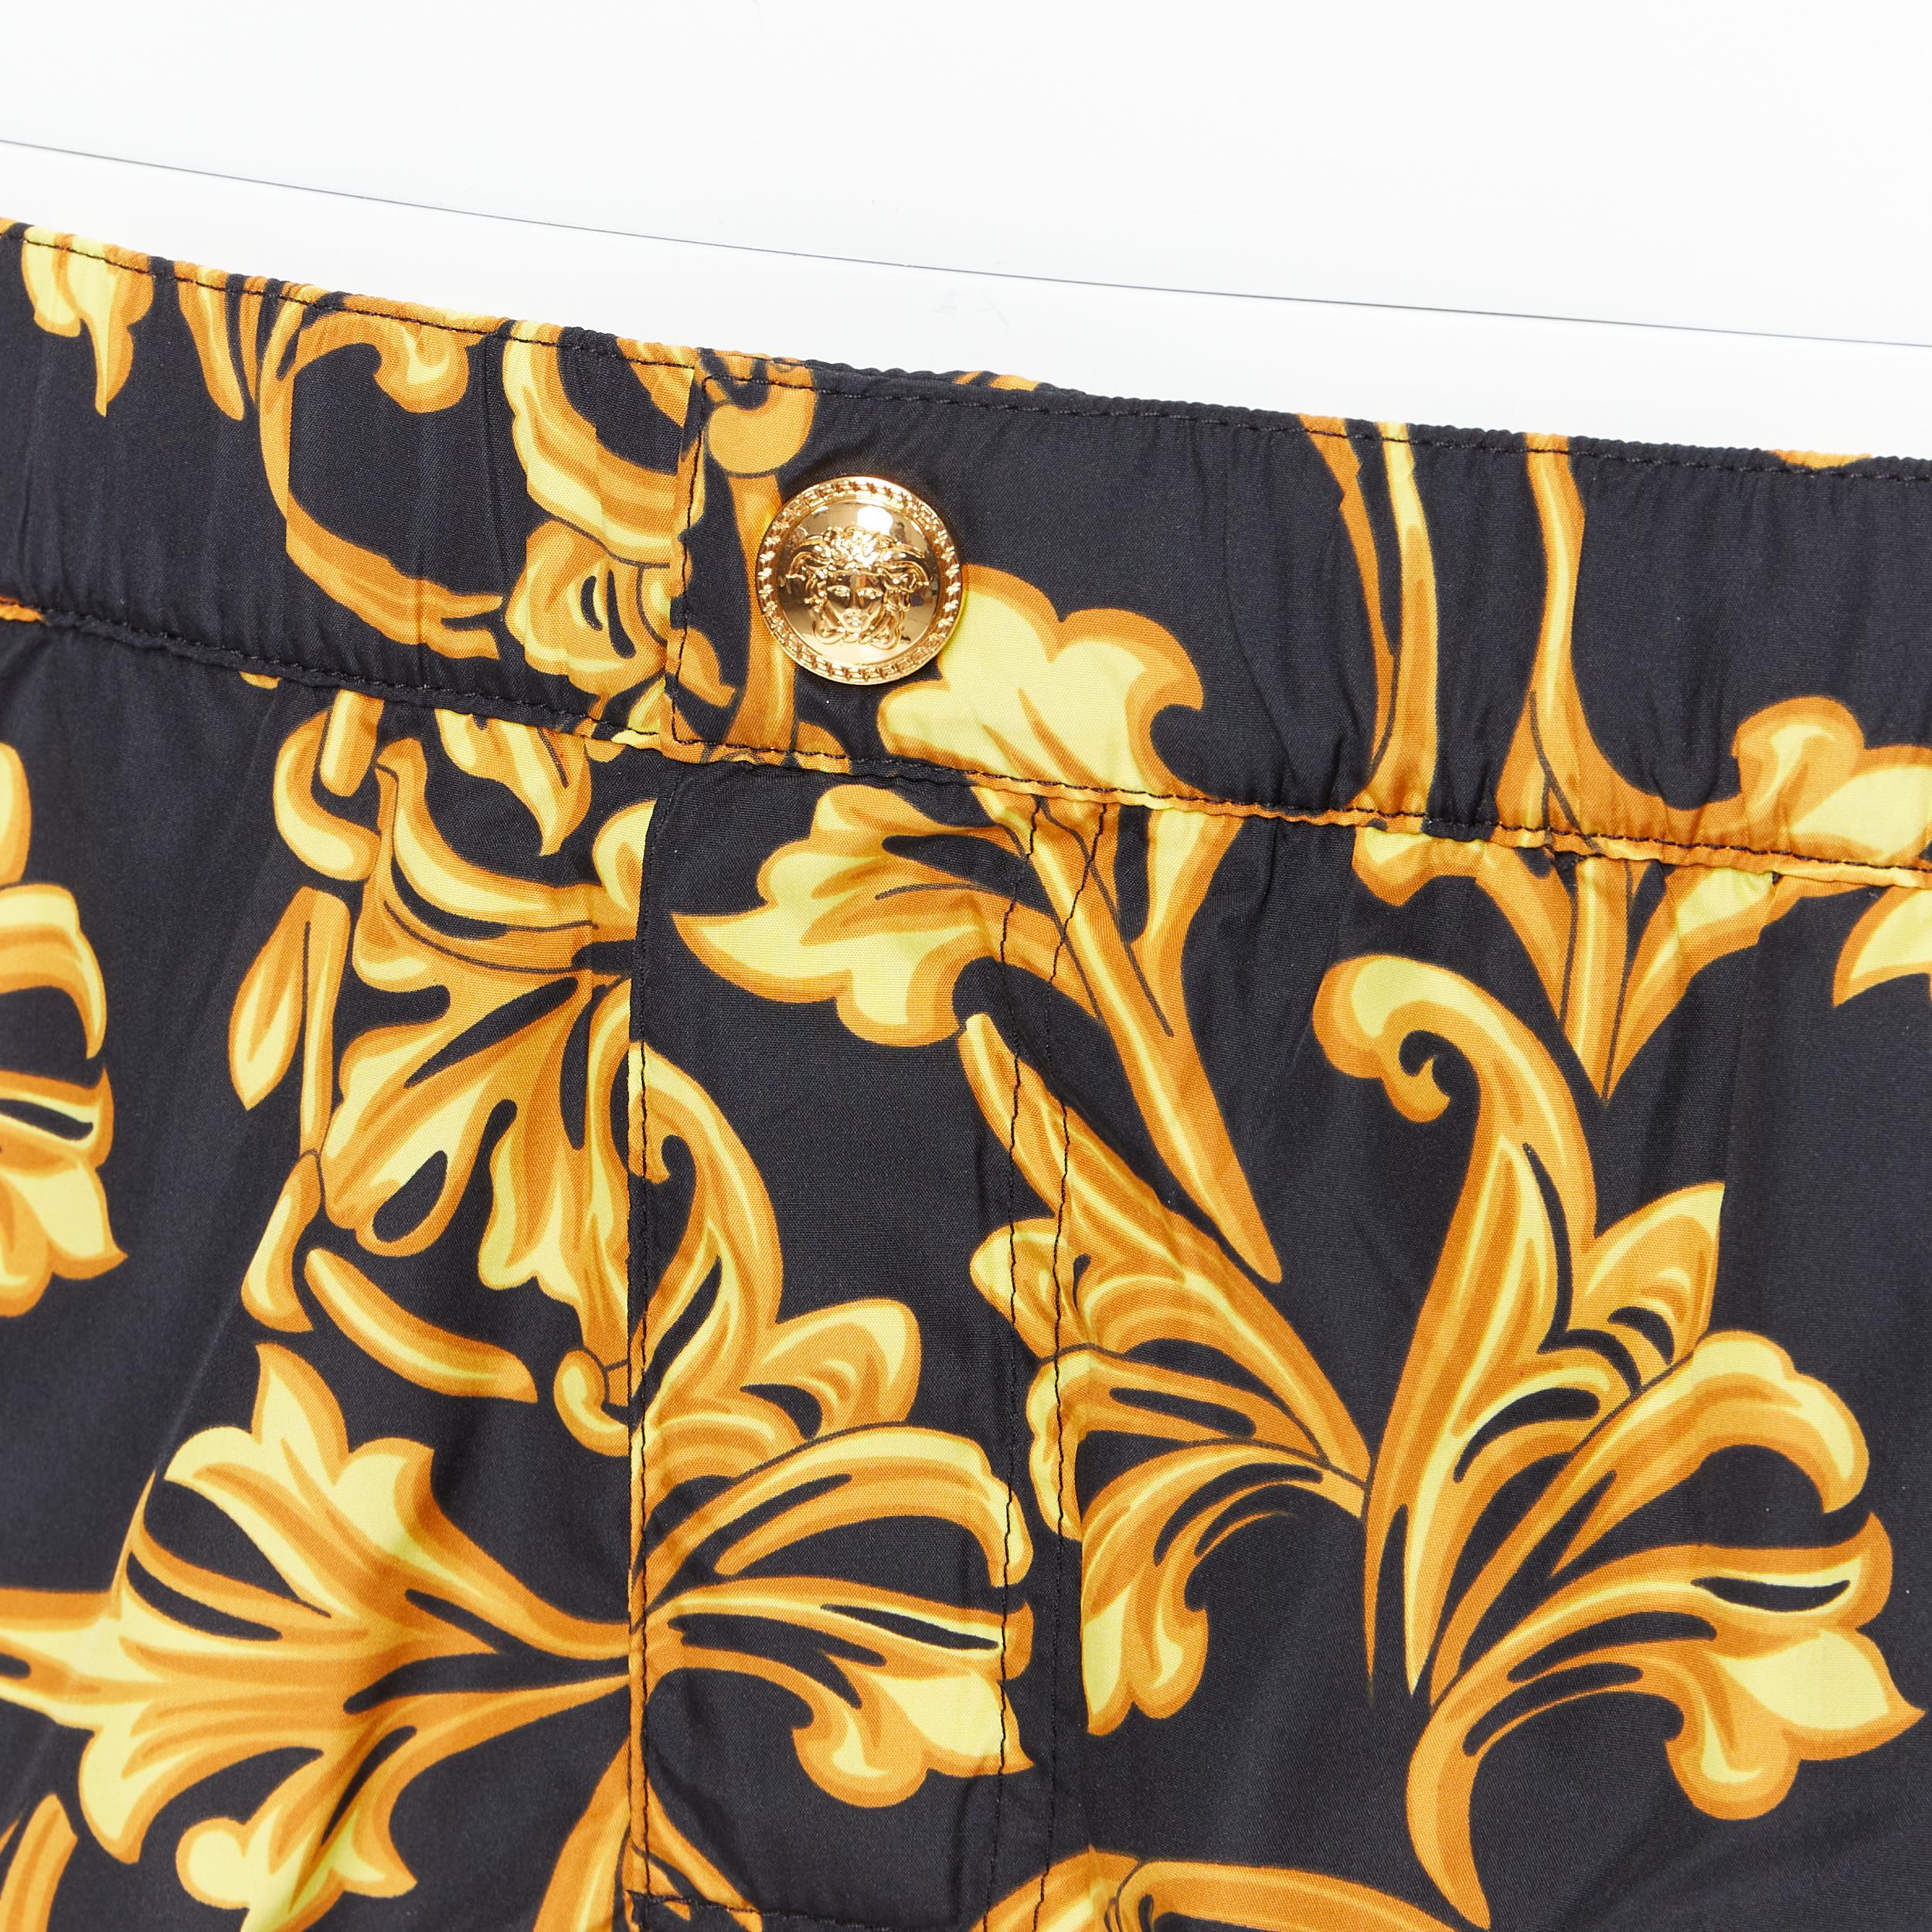 new VERSACE gold Medusa button black floral barocco summer swim shorts IT6 L 
Reference: TGAS/B00604 
Brand: Versace 
Designer: Donatella Versace 
Material: Polyester 
Color: Black 
Pattern: Floral 
Extra Detail: Gold-tone Medusa button. Dual side